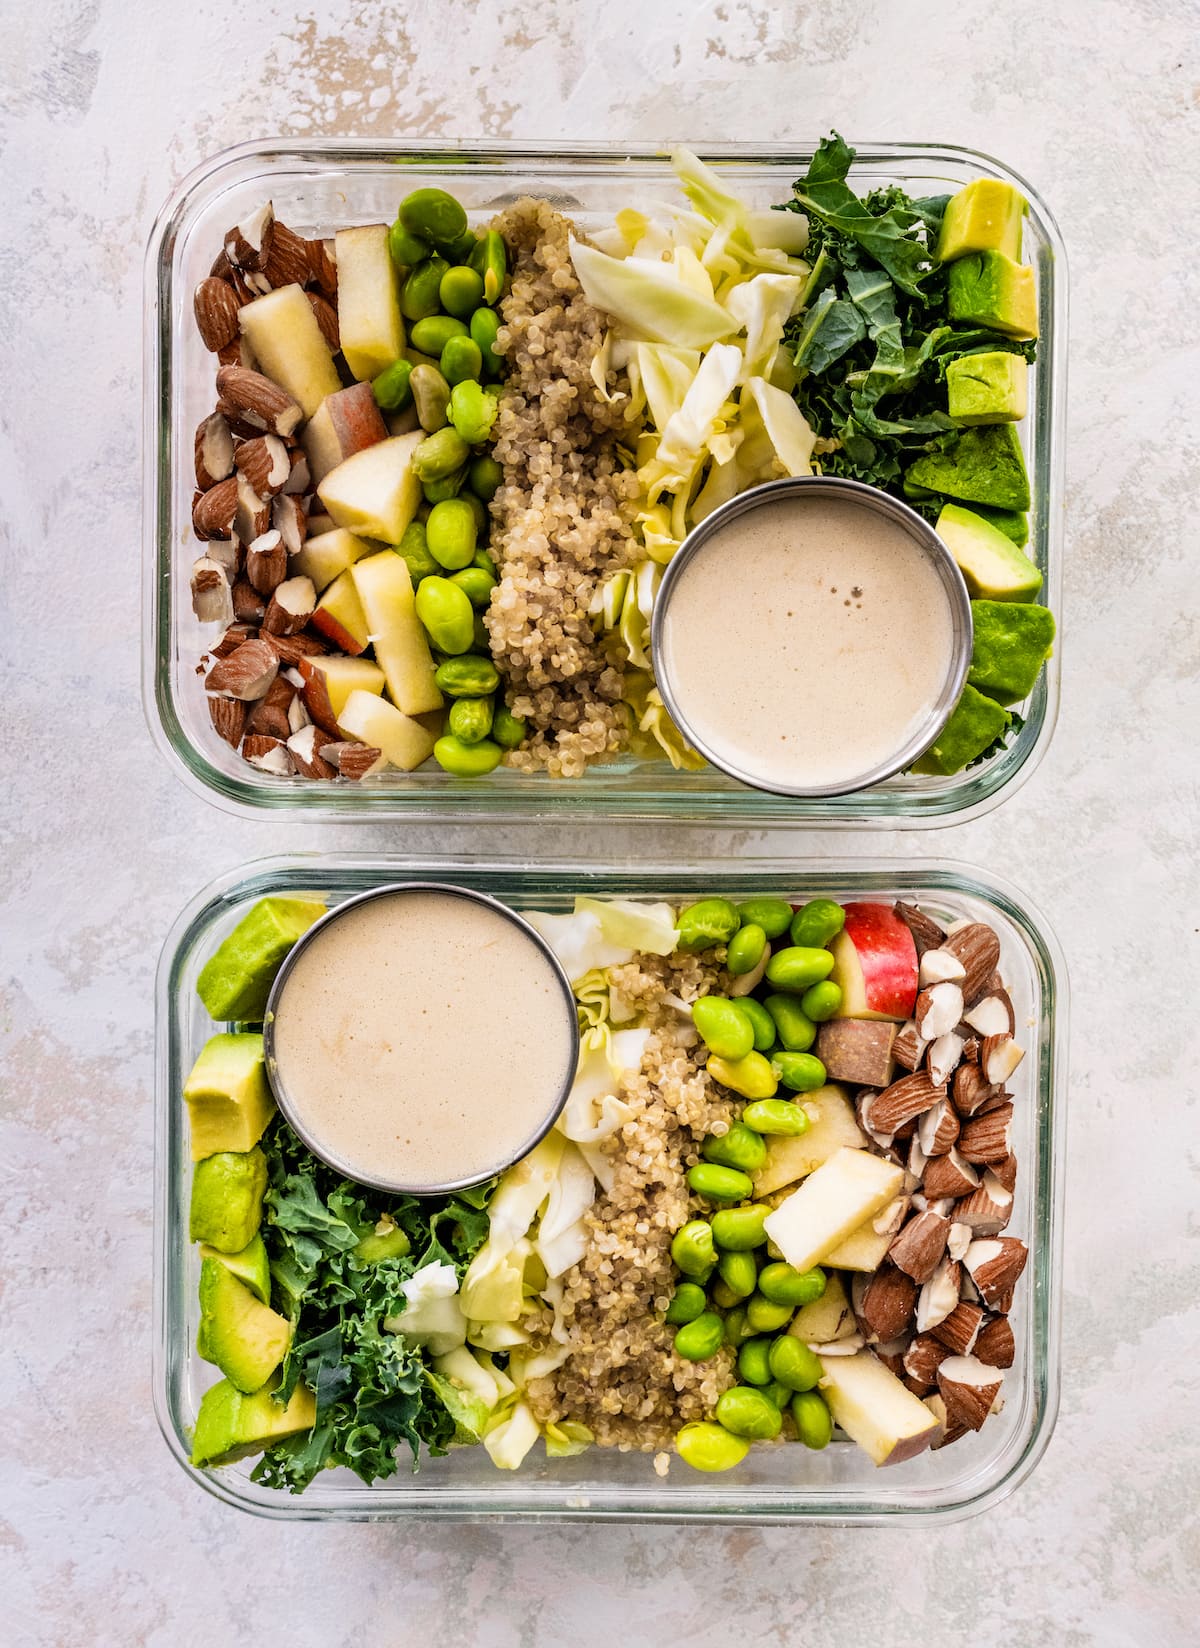 Two glass storage containers layered with almonds, apple, edamame, quinoa, cabbage, kale and avocado. A small container of dressing is also in the container.